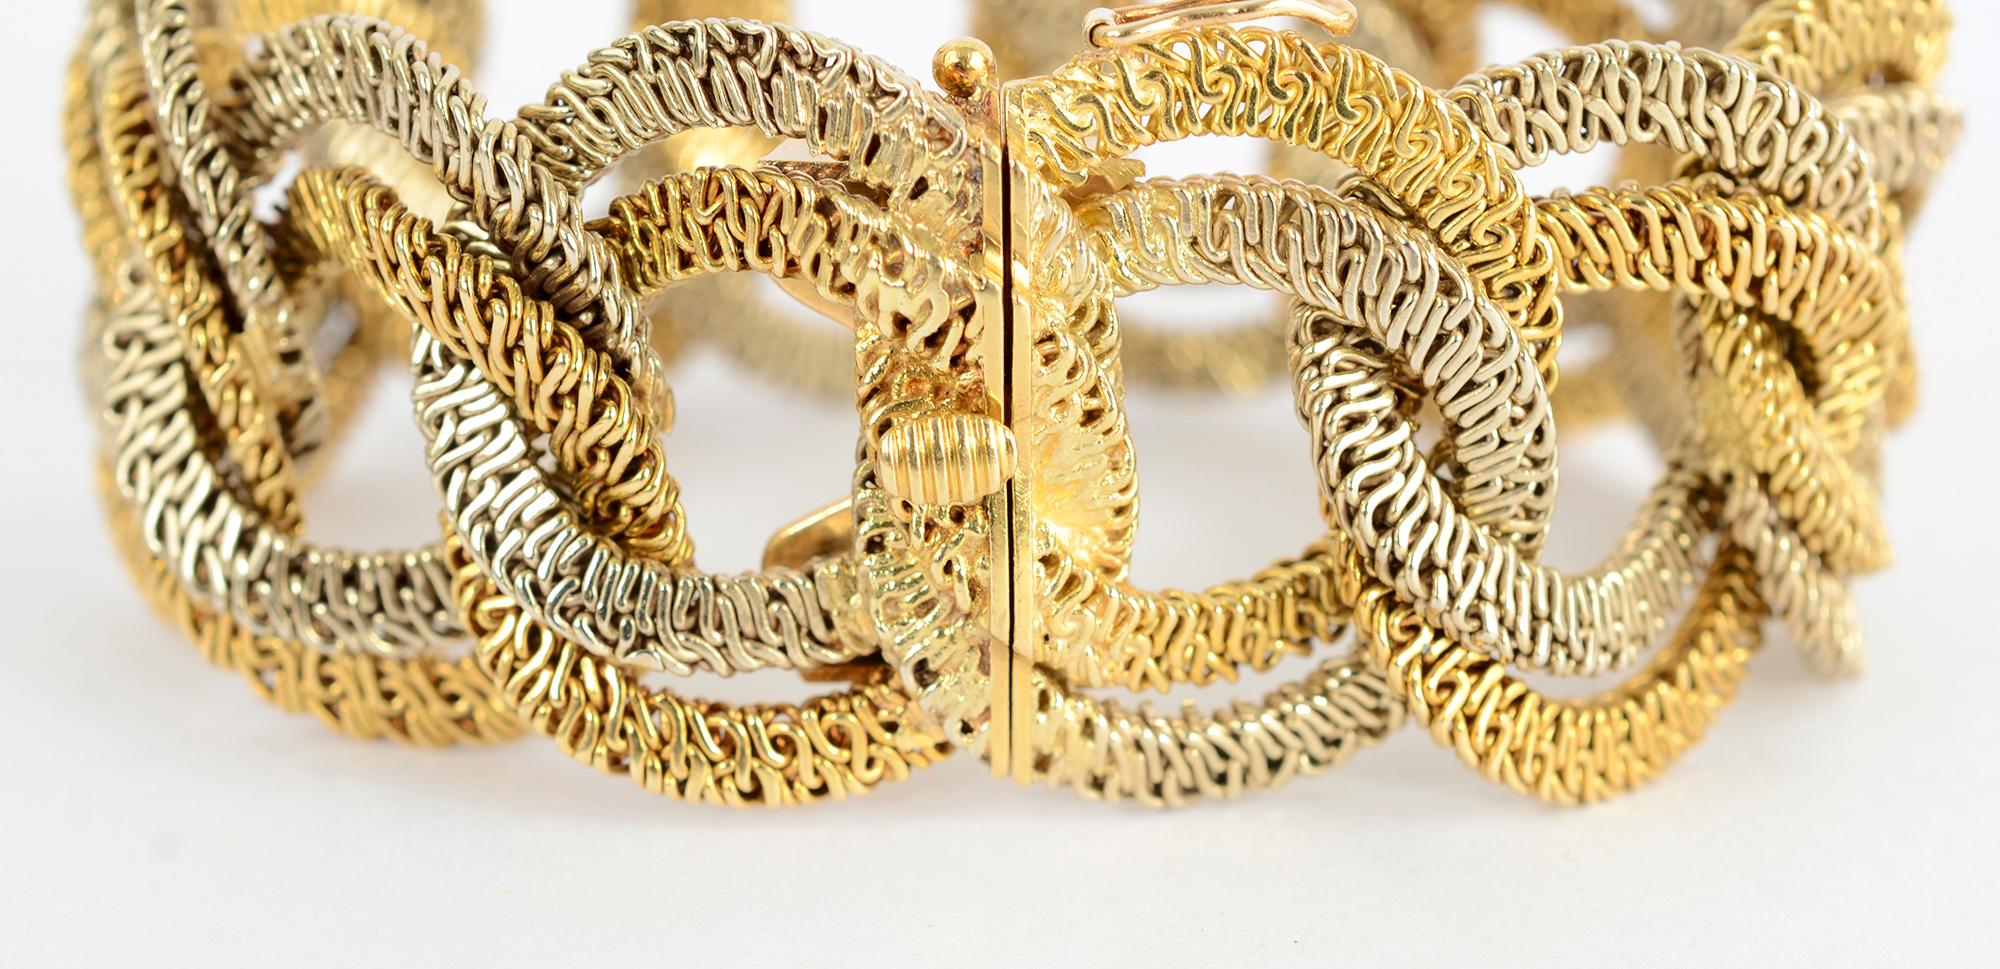 Bicolor Gold Overlapping Links Bracelet In Excellent Condition For Sale In Darnestown, MD